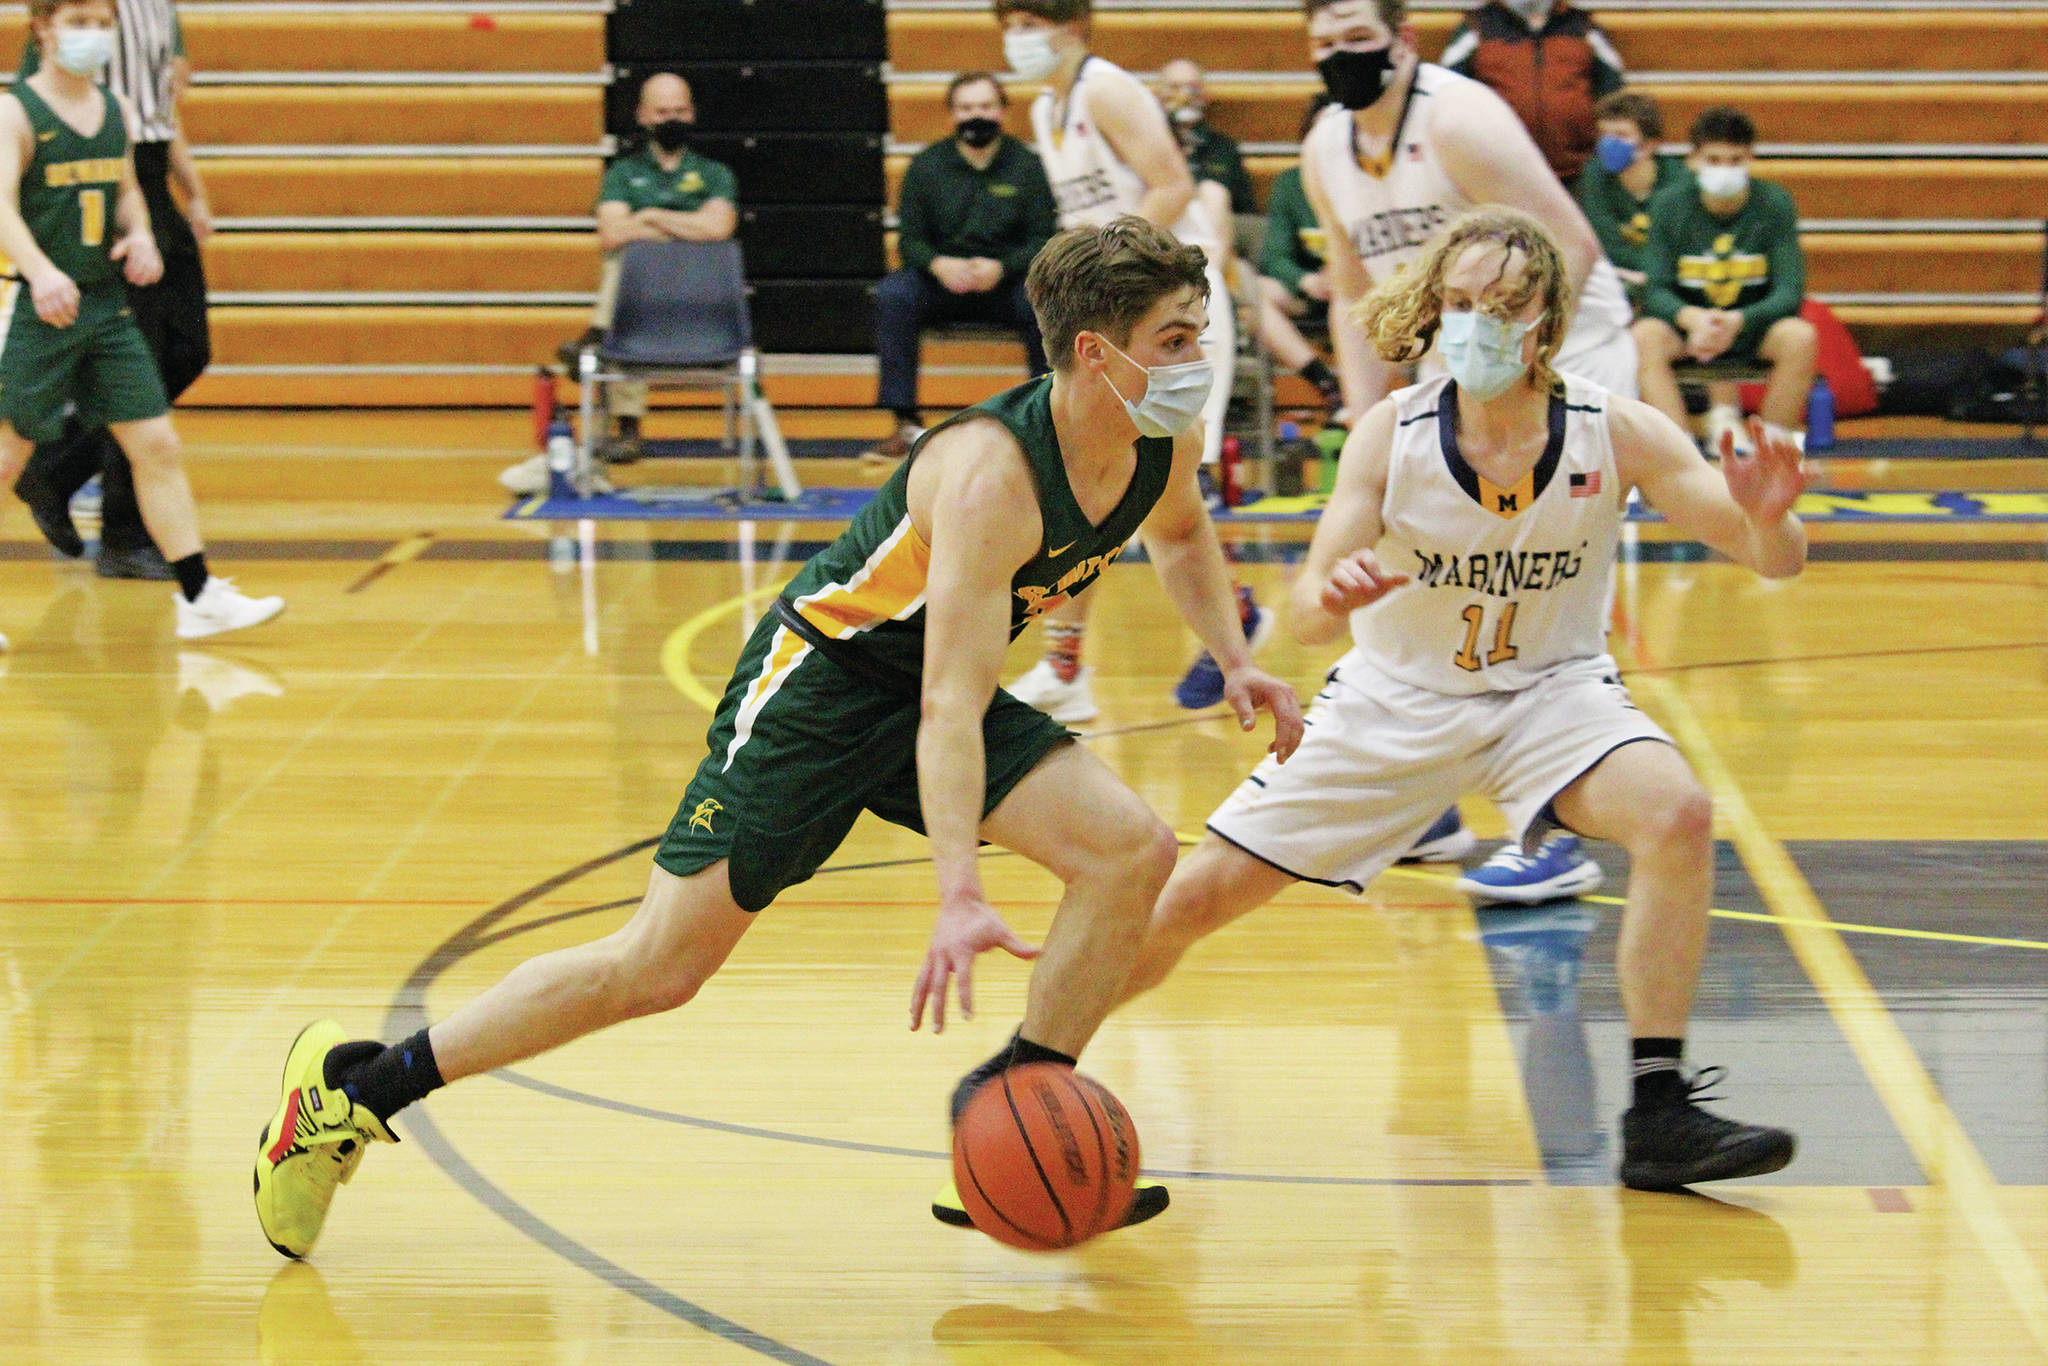 Seward's Max Pfeiffenberger makes a move past Homer's Parker Lowney during a Saturday, Jan. 30, 2021 basketball game at the Alice Witte Gymnasium in Homer, Alaska. (Photo by Megan Pacer/Homer News)